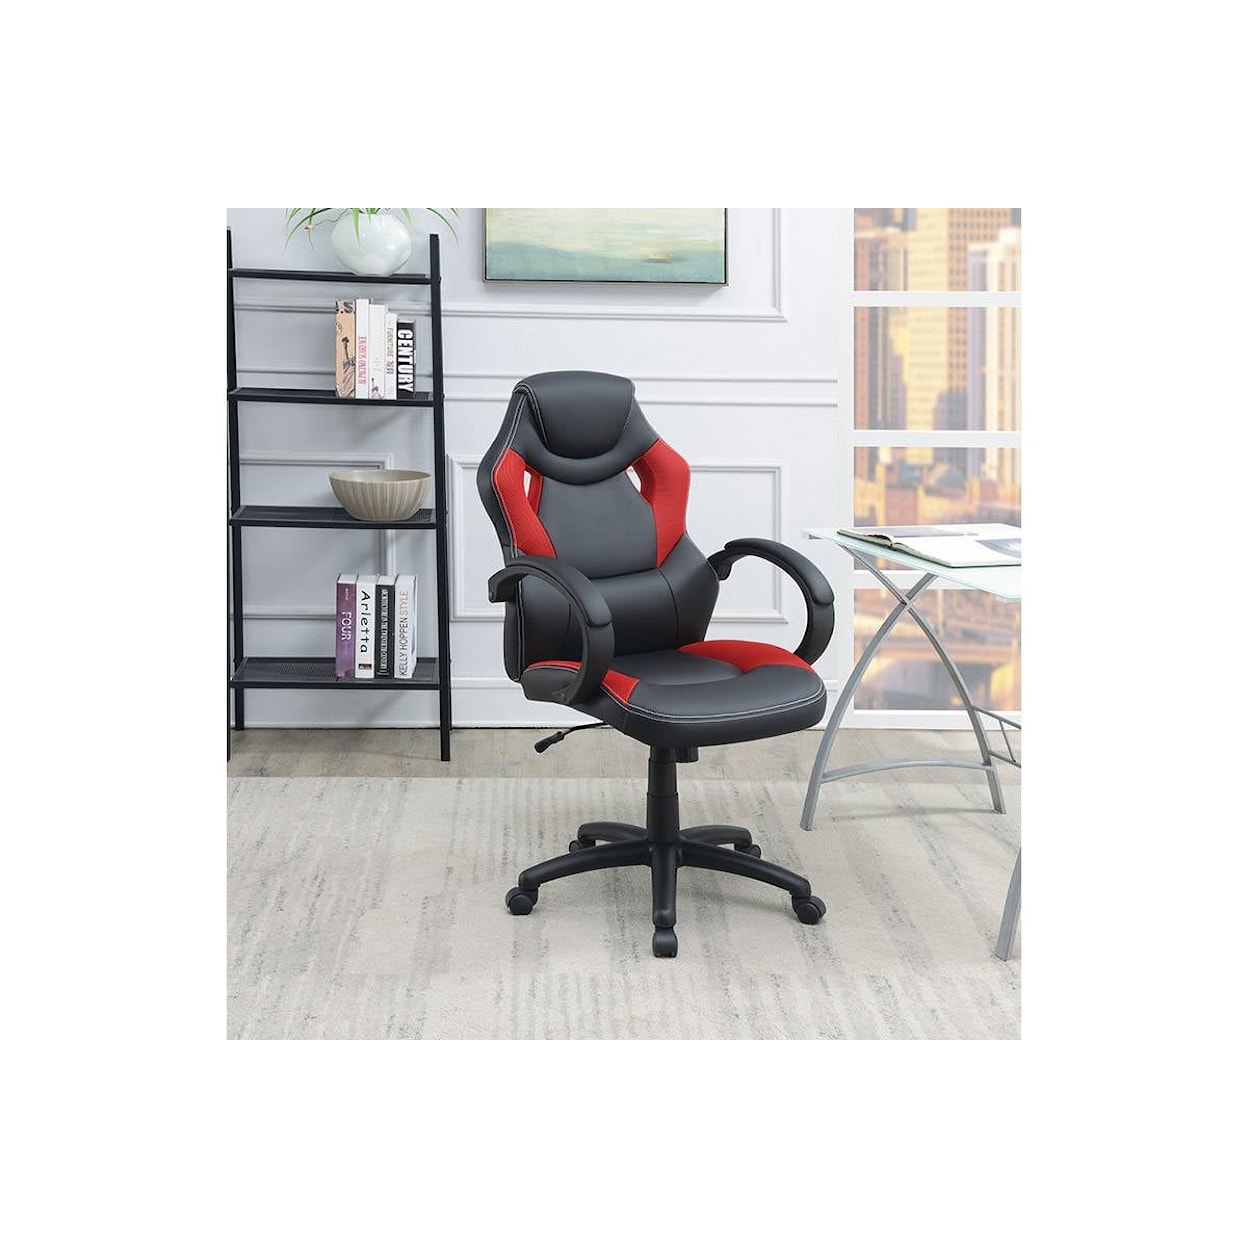 Poundex Office Chairs BLACK/RED ACCENT OFFICE CHAIR |